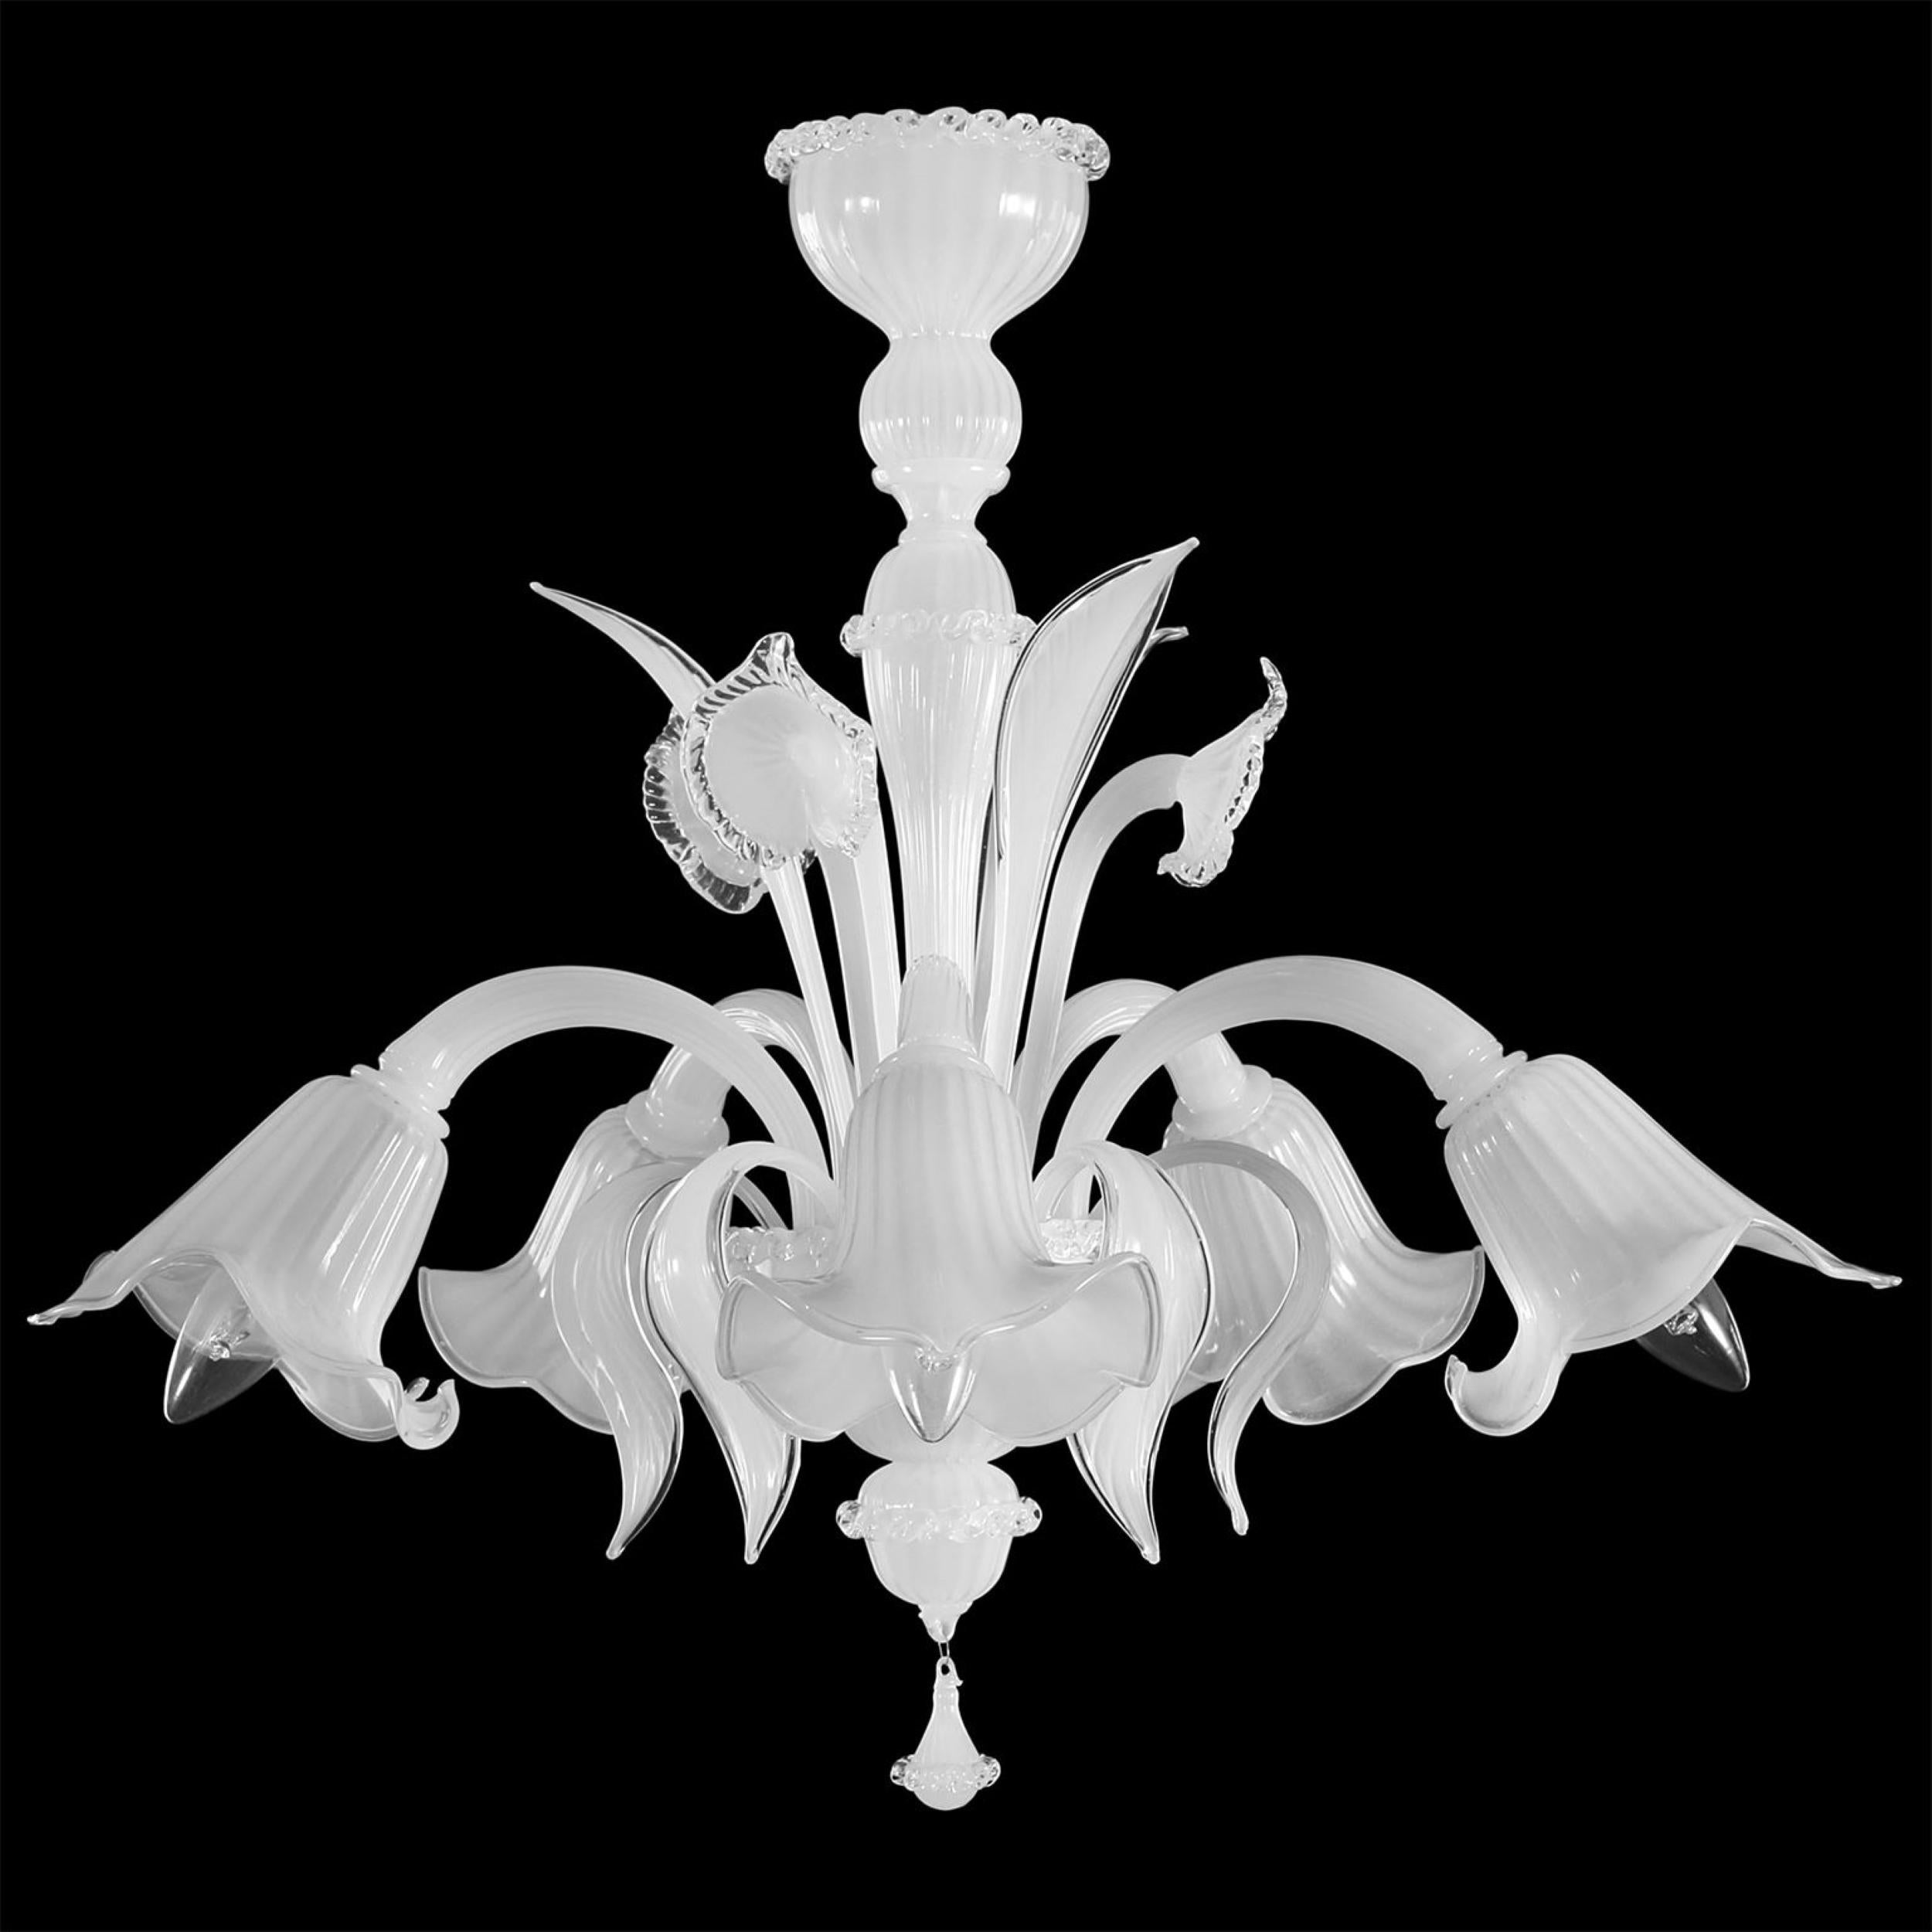 The venetian chandelier Accadueo presents an organic design, which is the result of an inspiration taken from the nature. The cups and some details remind the fluid flow of the water, a vital element which symbolises the pureness, the simplicity,